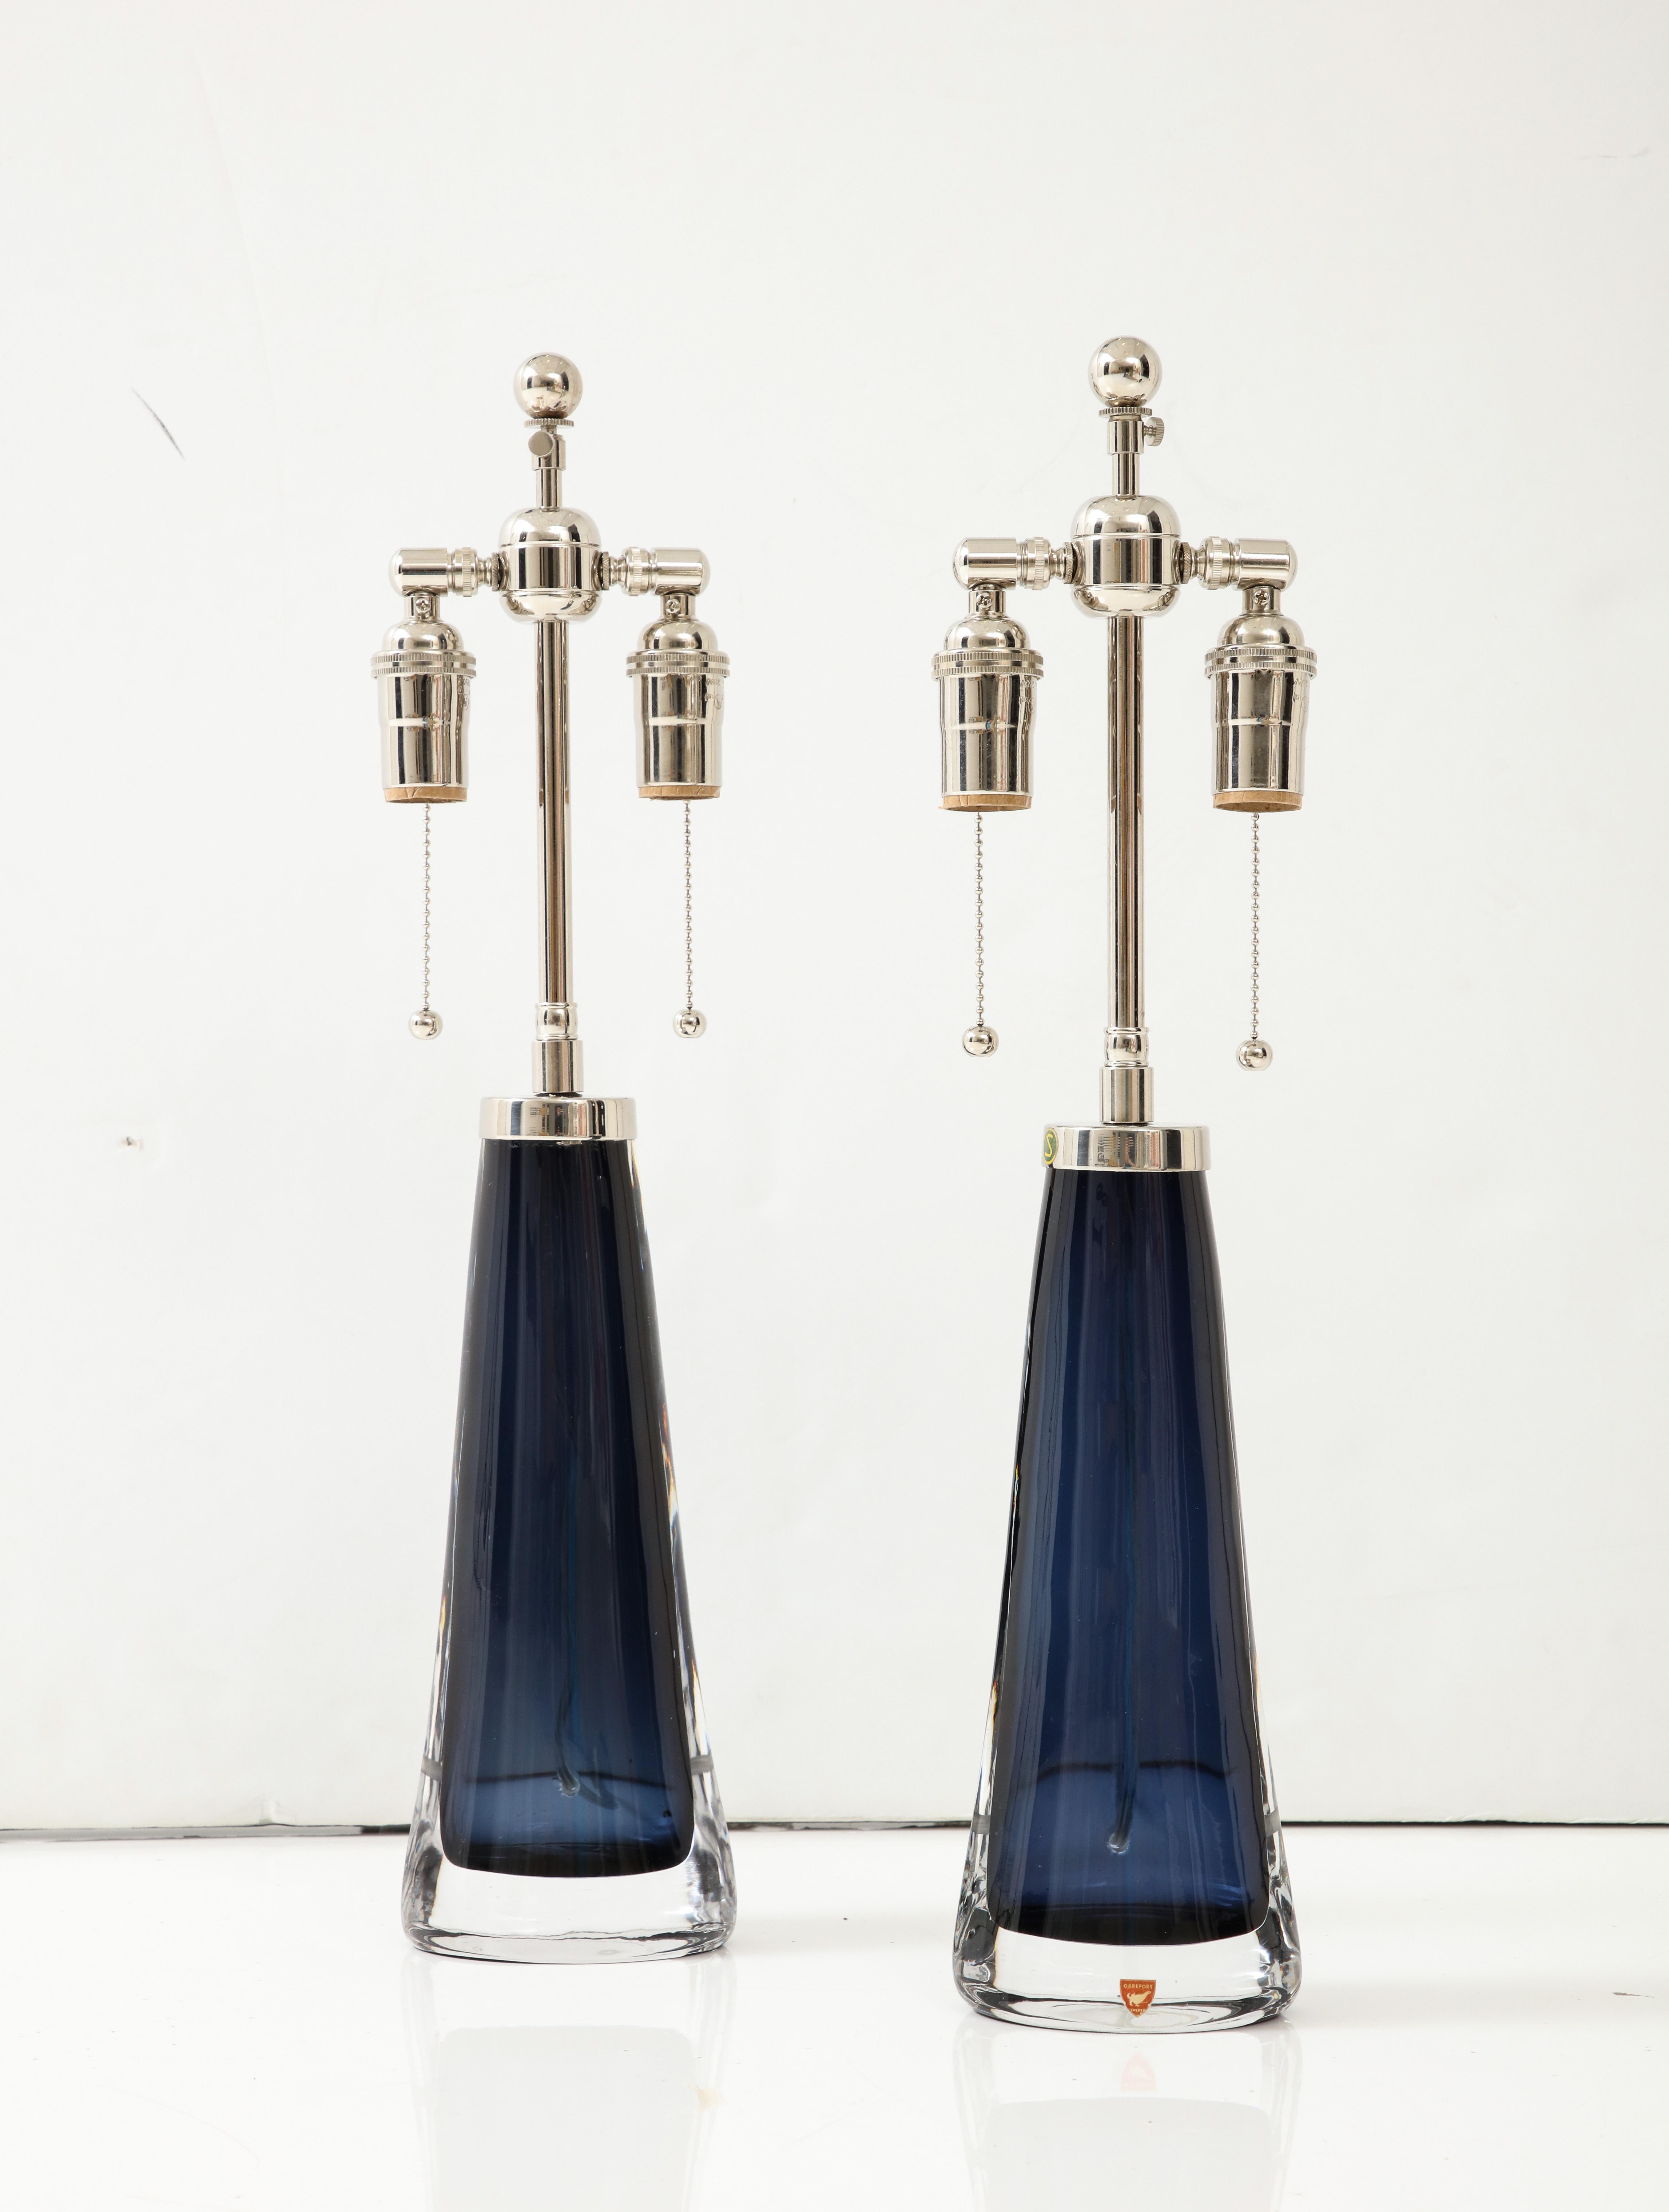 Stunning pair of Extra large Midnight Sapphire blue glass lamps 
designed by Carl Fagerlund for Orrefors
There lamps have been Newly rewired with adjustable polished Chrome
double clusters that take standard size light bulbs.
Each socket takes up to